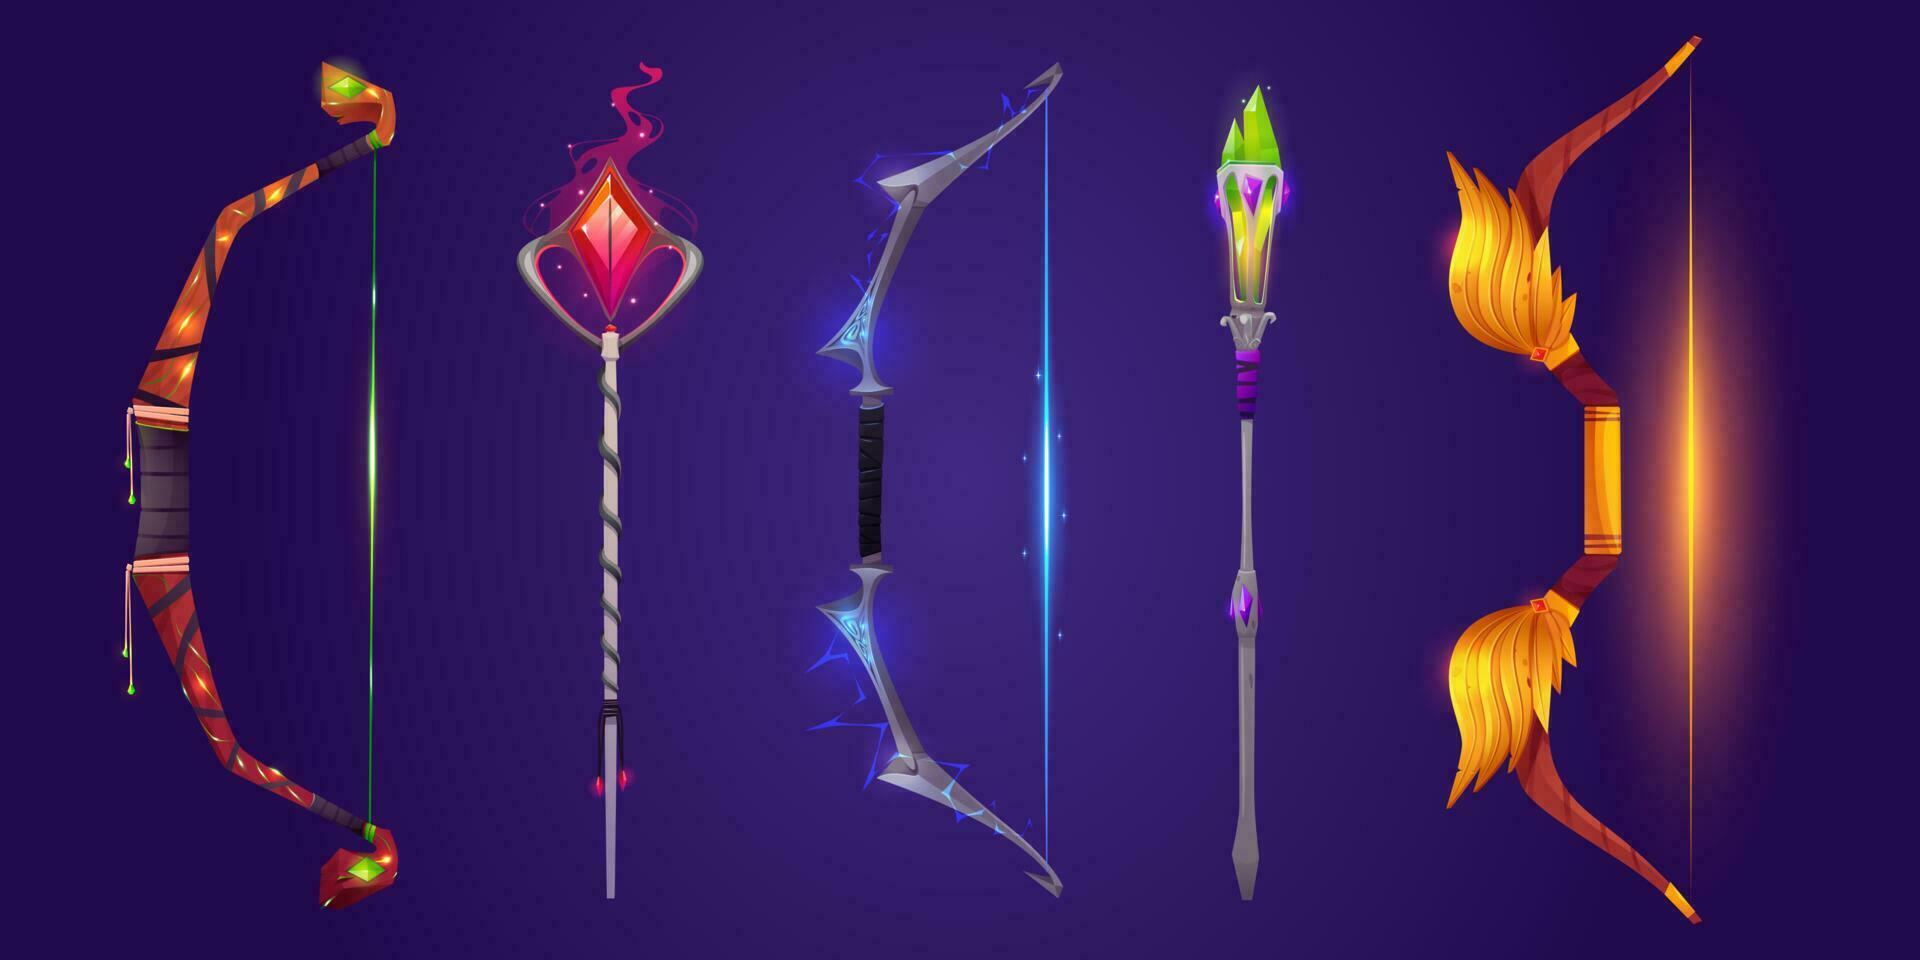 Magic bow and spear weapon icon for fantasy game vector